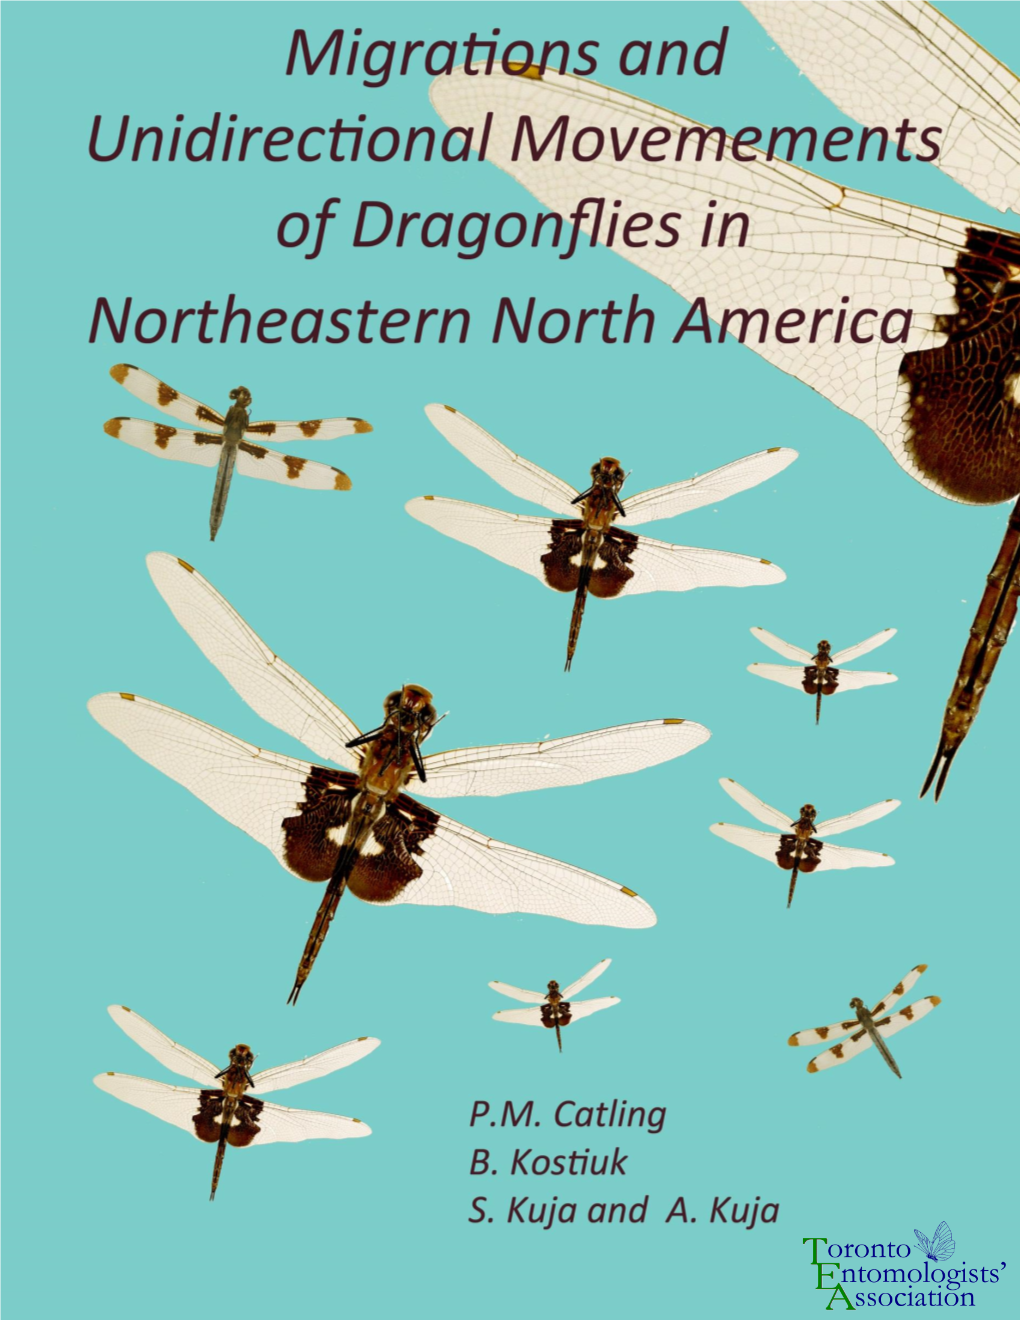 Migrations and Unidirectional Movements of Dragonflies in Northeastern North America